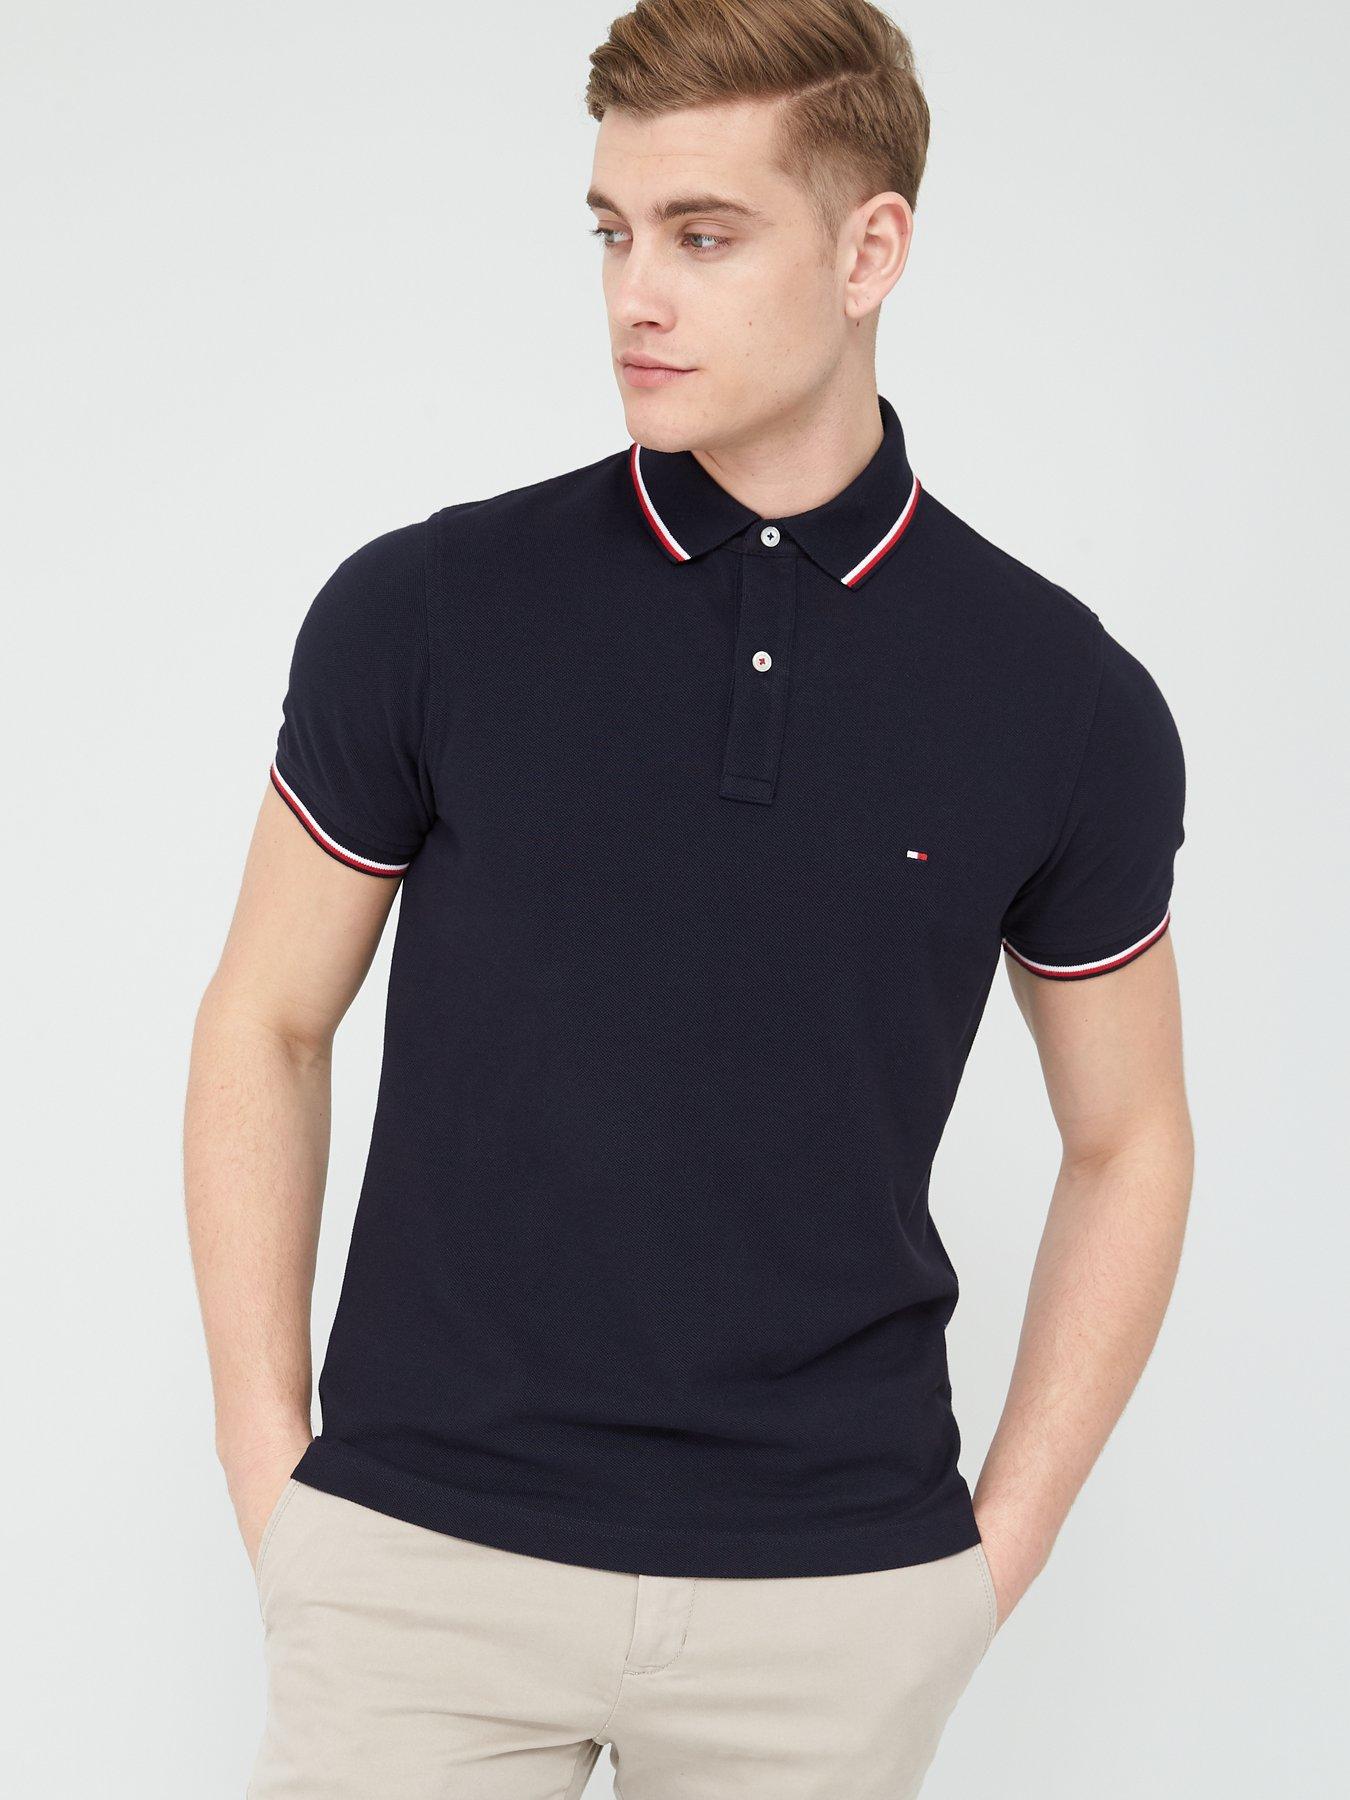 Hilfiger Tipped Slim Fit Polo - Sky Navy | very.co.uk